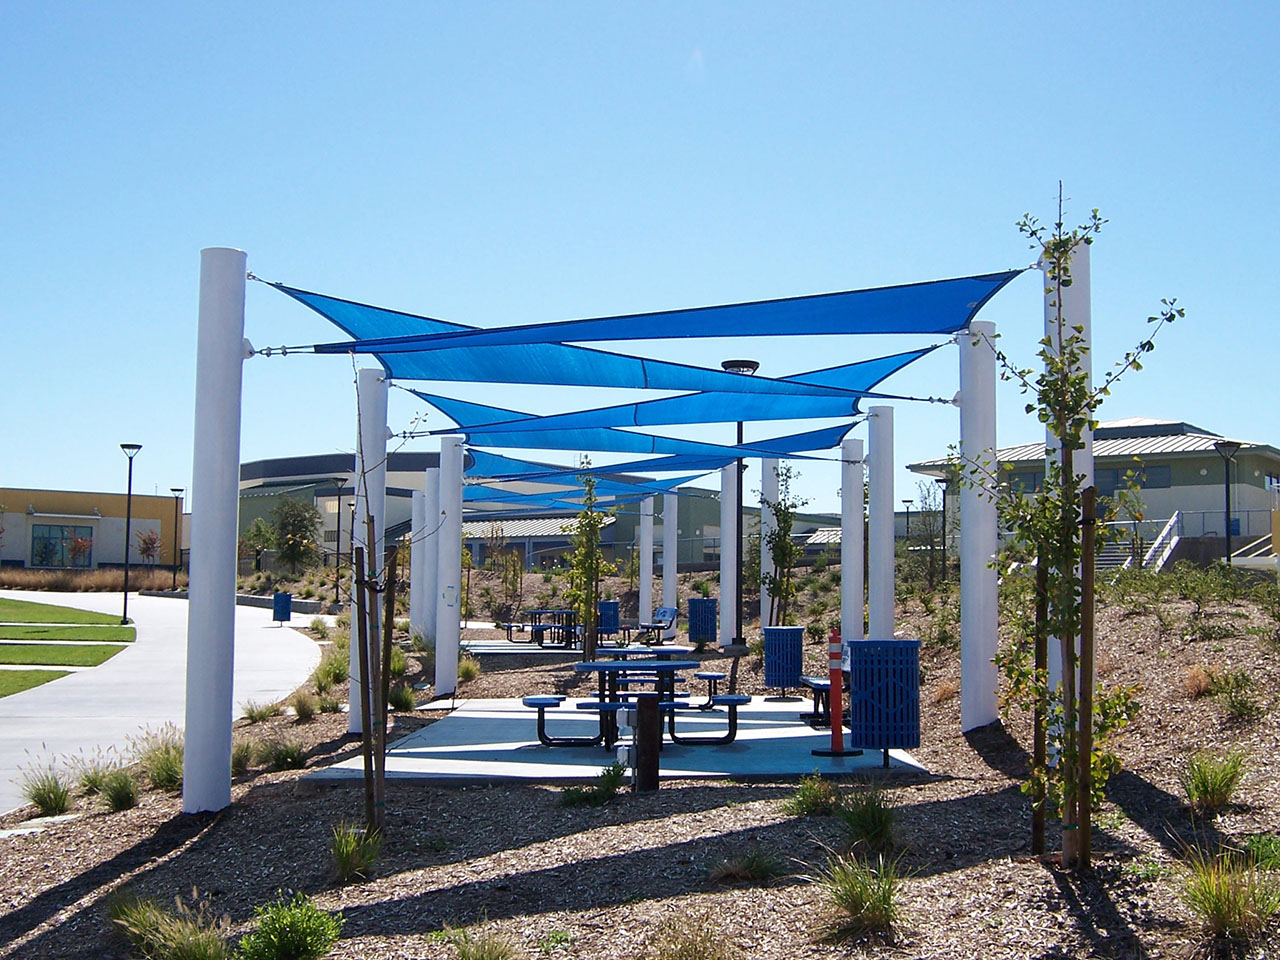 white and blue shade structure covering outdoor seating